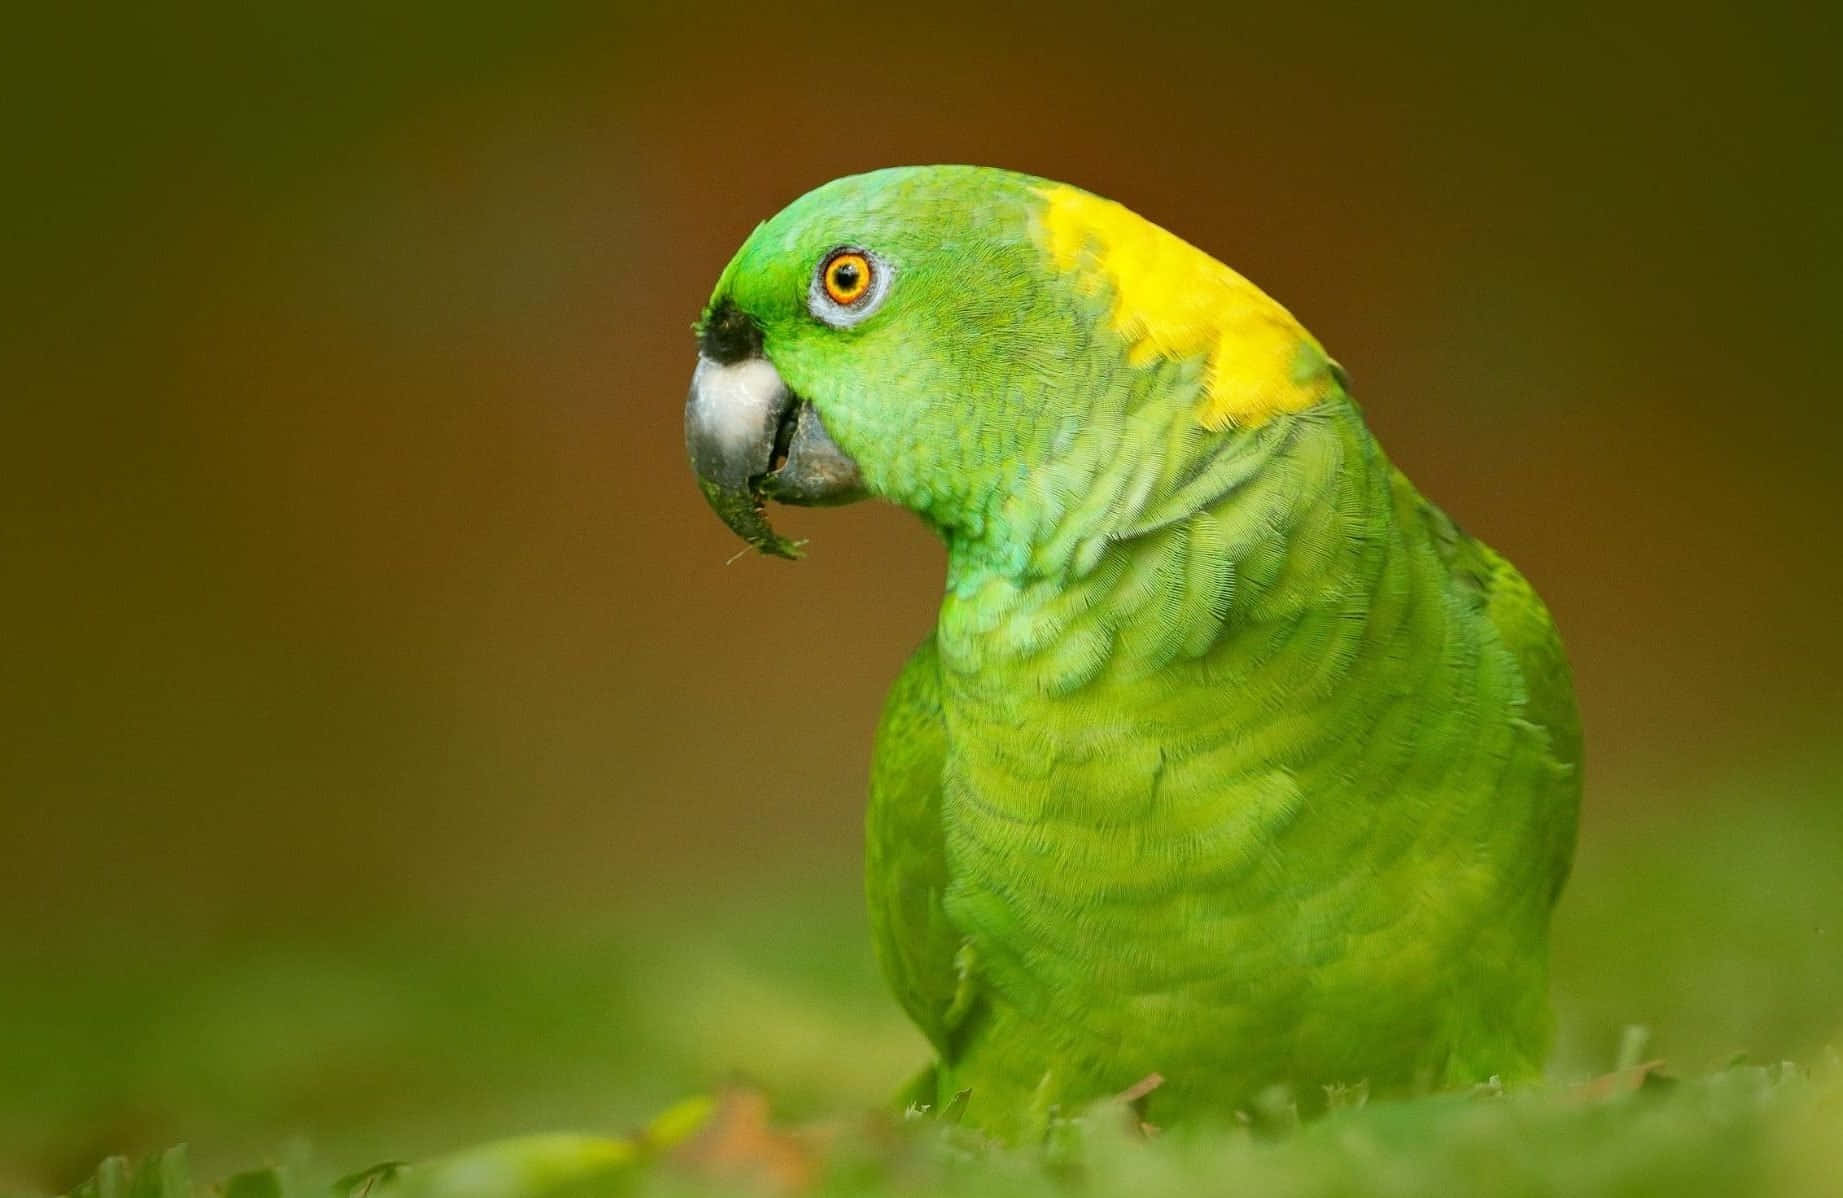 A Colorful Parrot Sitting on a Branch